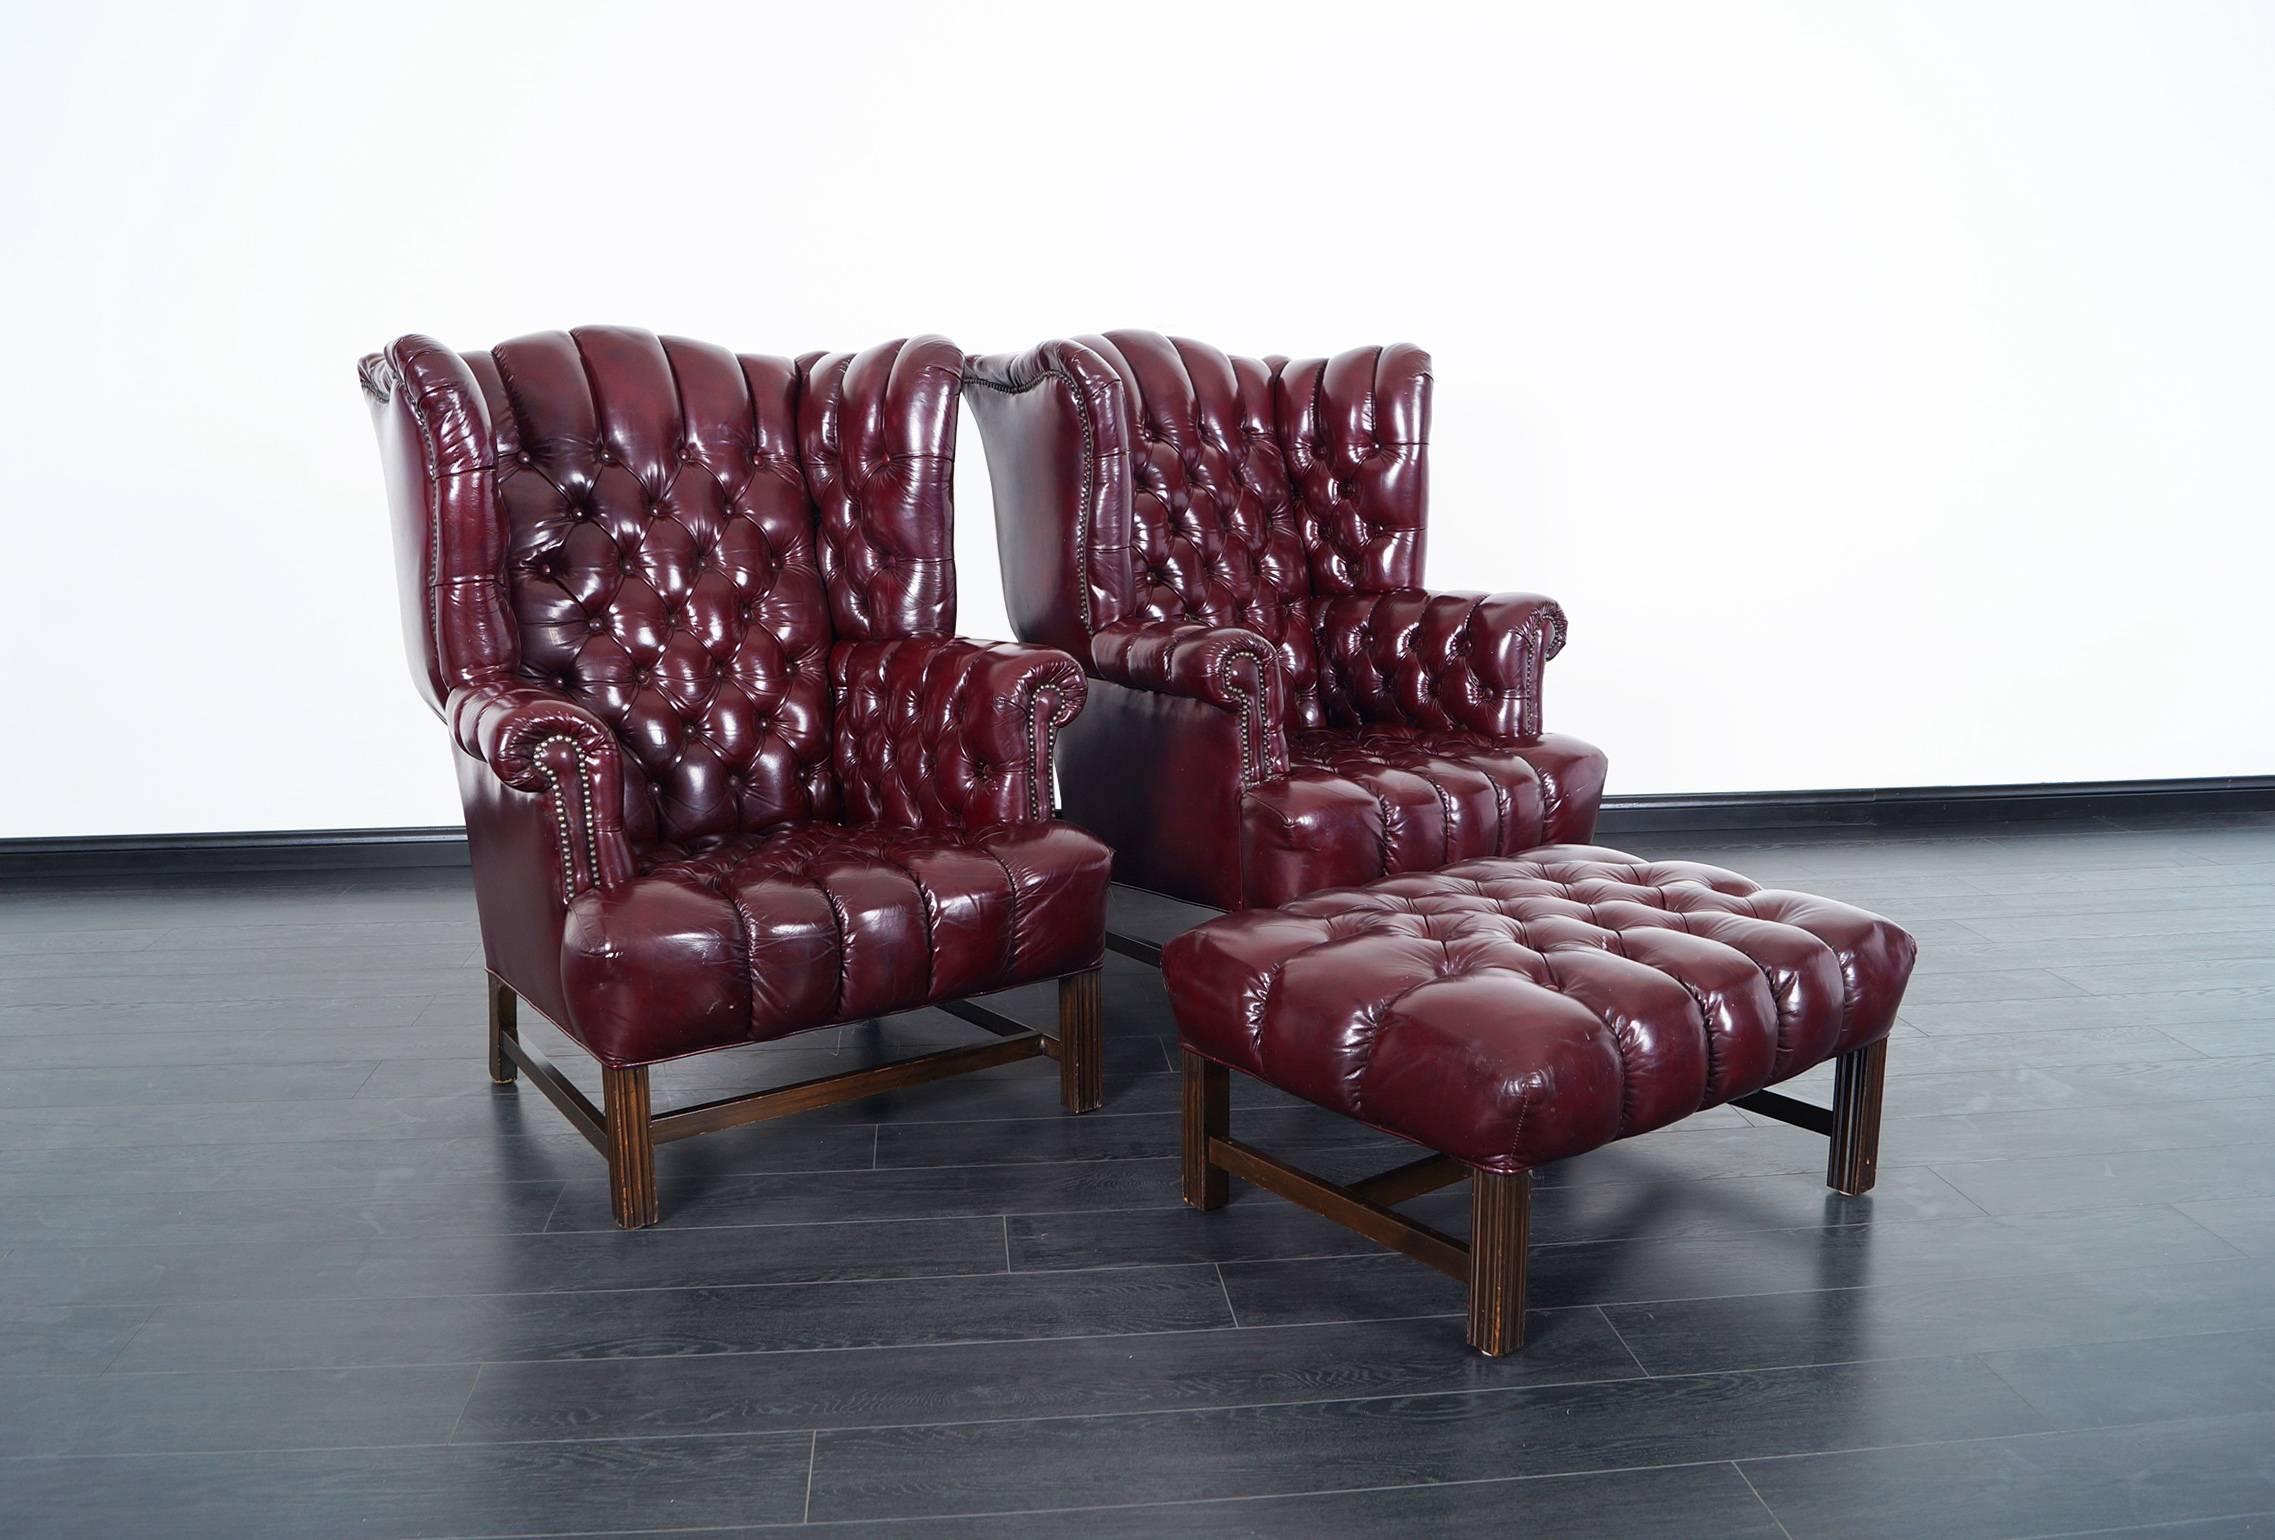 Pair of stunning burgundy leather tufted wingback chairs. Ottoman comes included. Ottoman: 32